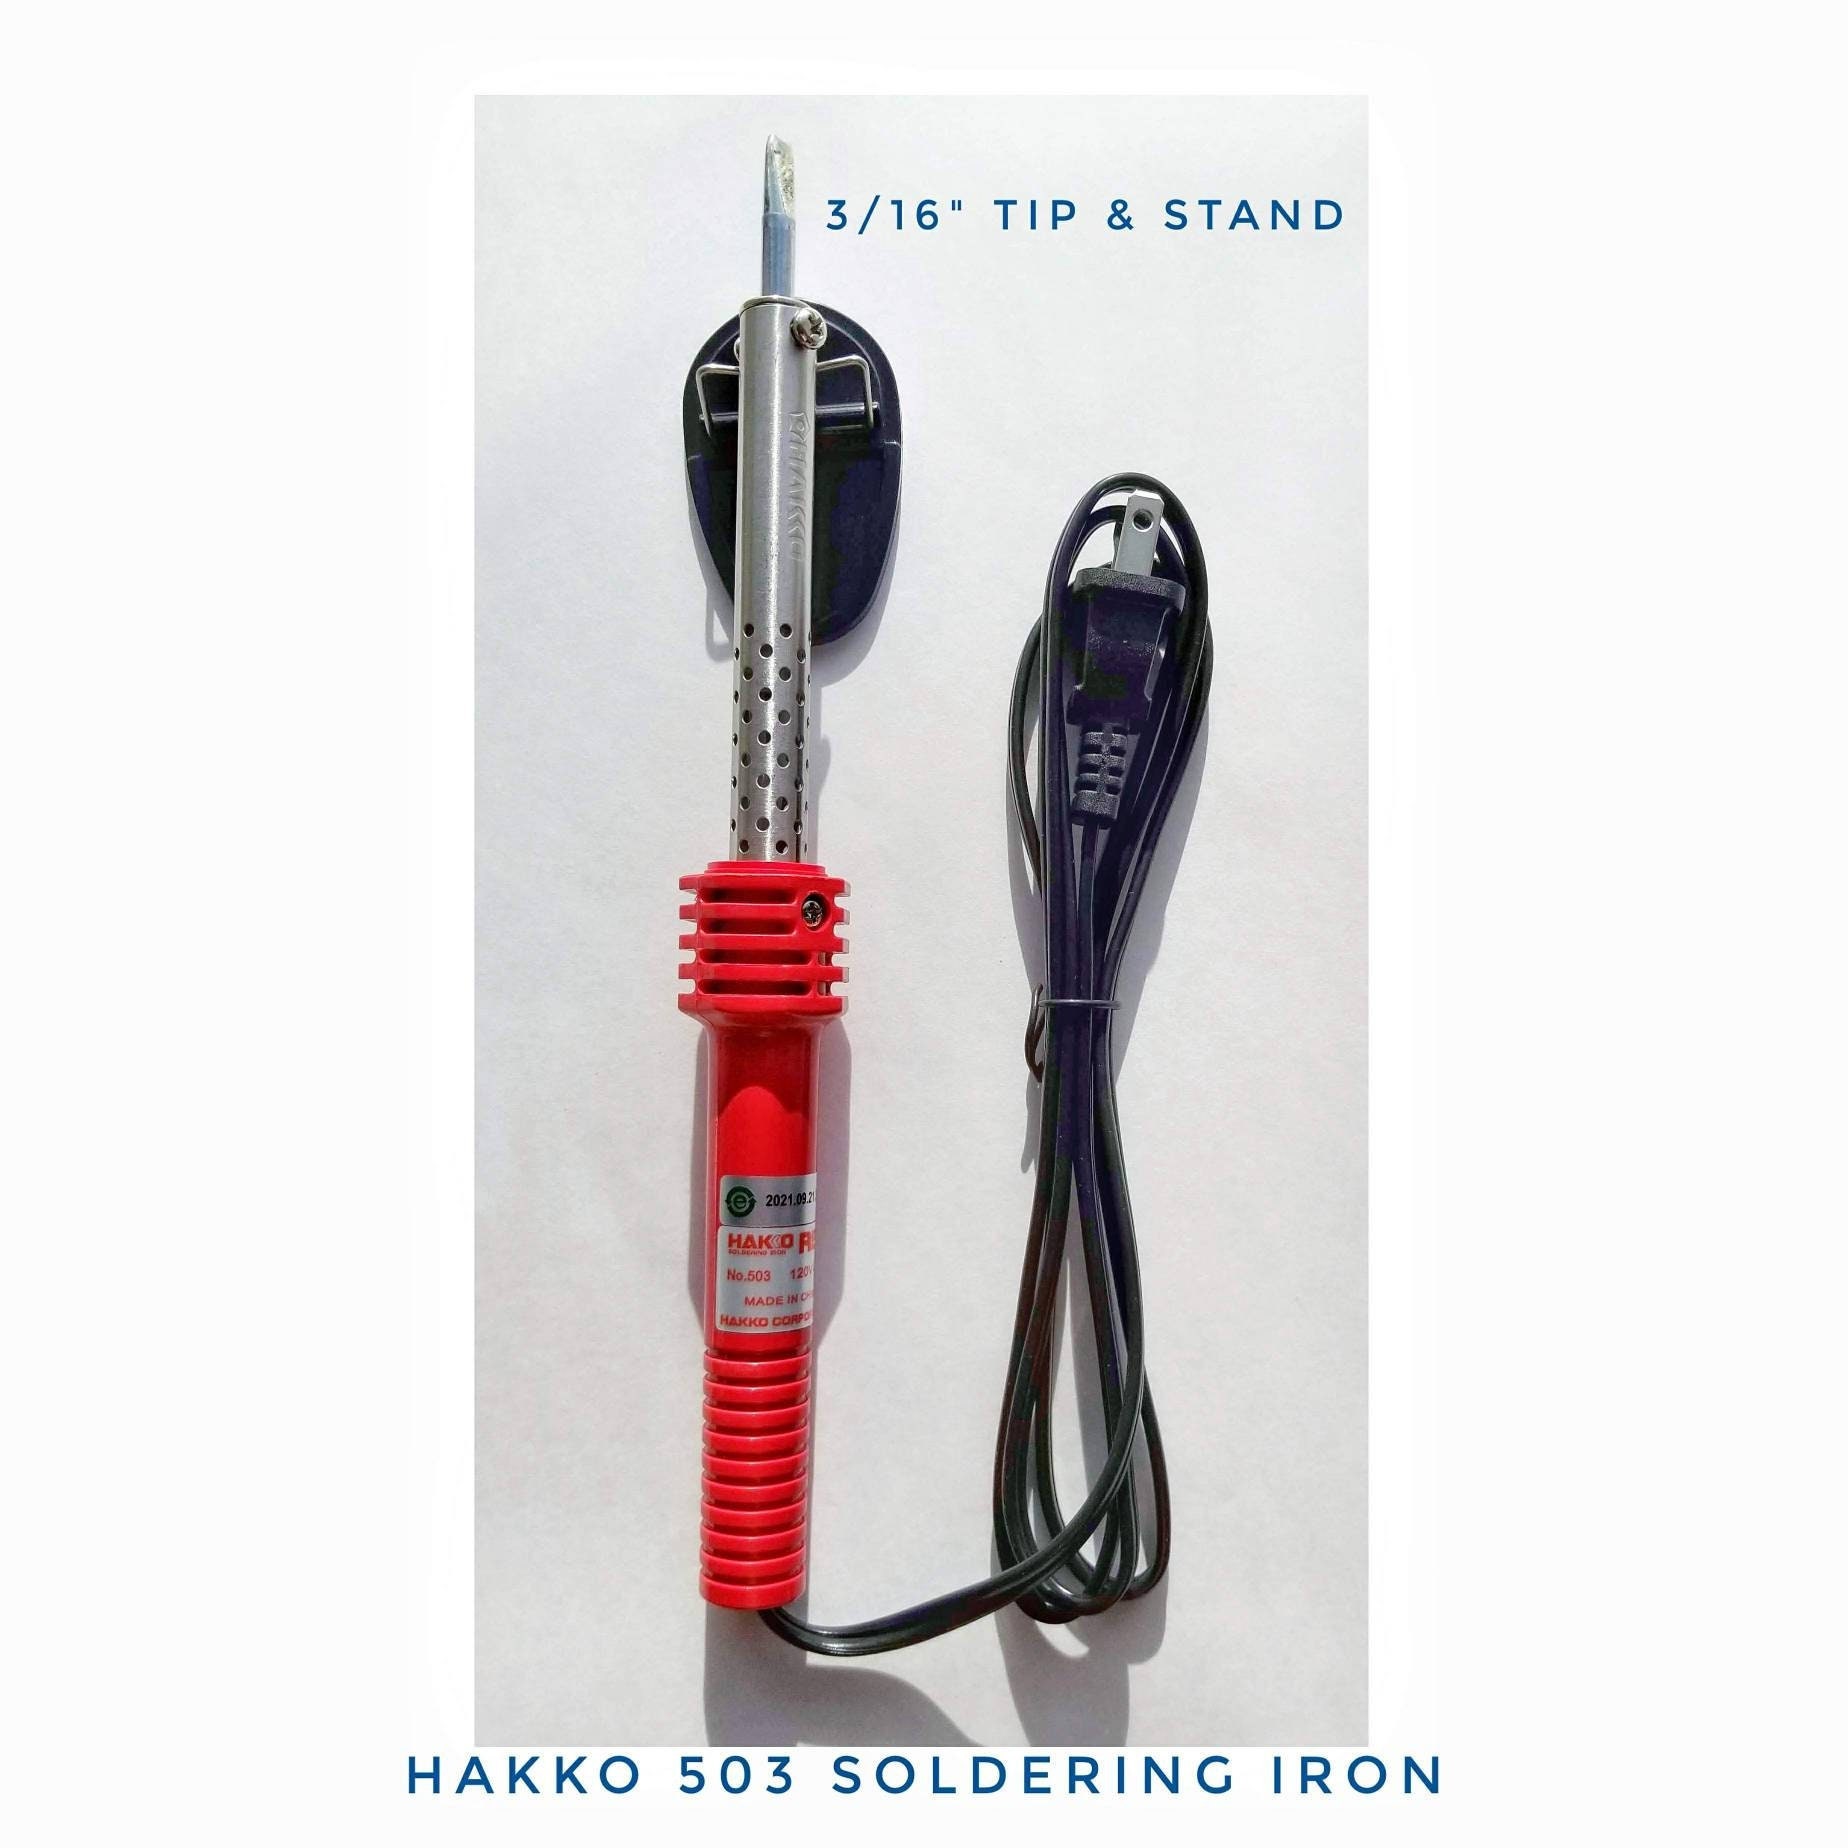 Soldering Iron, Hakko for Stained Glass Art & Jewelry. Stand Holder-rest  Included. 900F Degrees, 3/16 Tip. Great for Copper Foil, Beginner. 